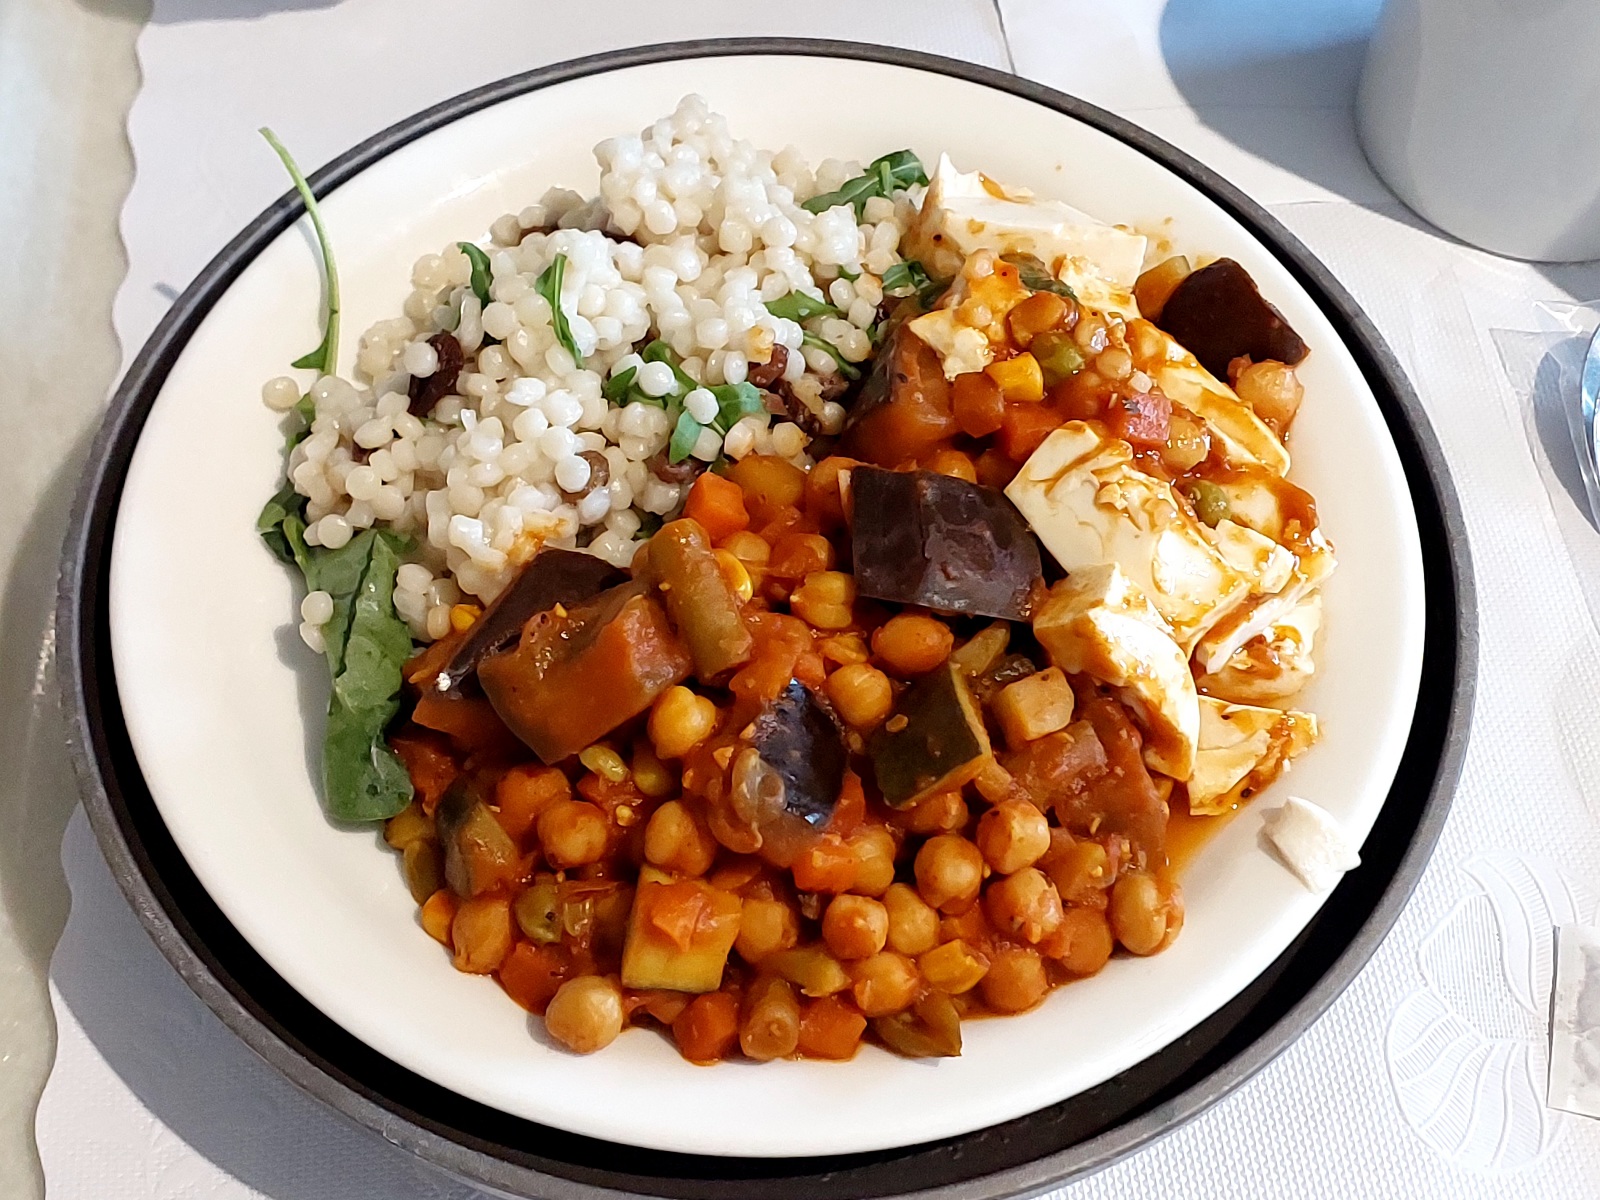 Moroccan chickpea something with couscous salad